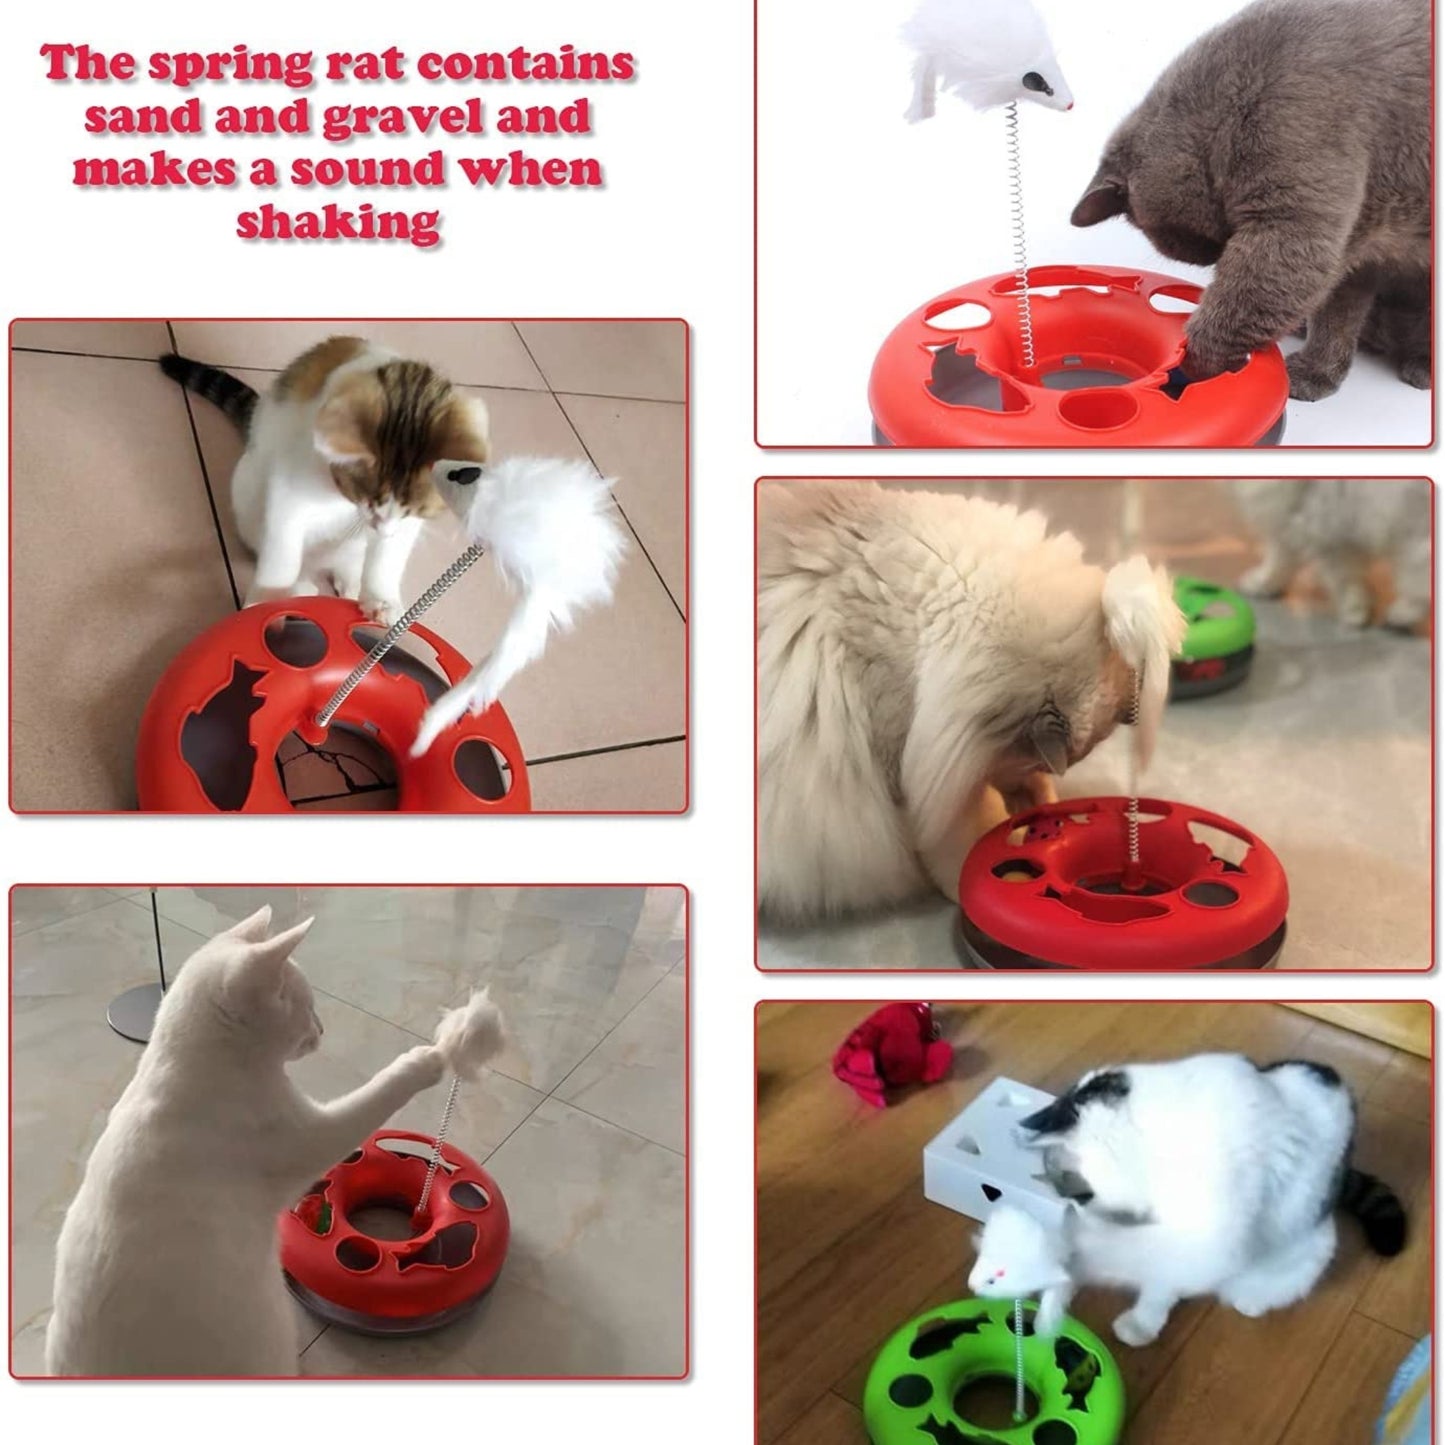 Foodie Puppies Cat Toy with Spinning Balls & Teaser for Cat & Kitten